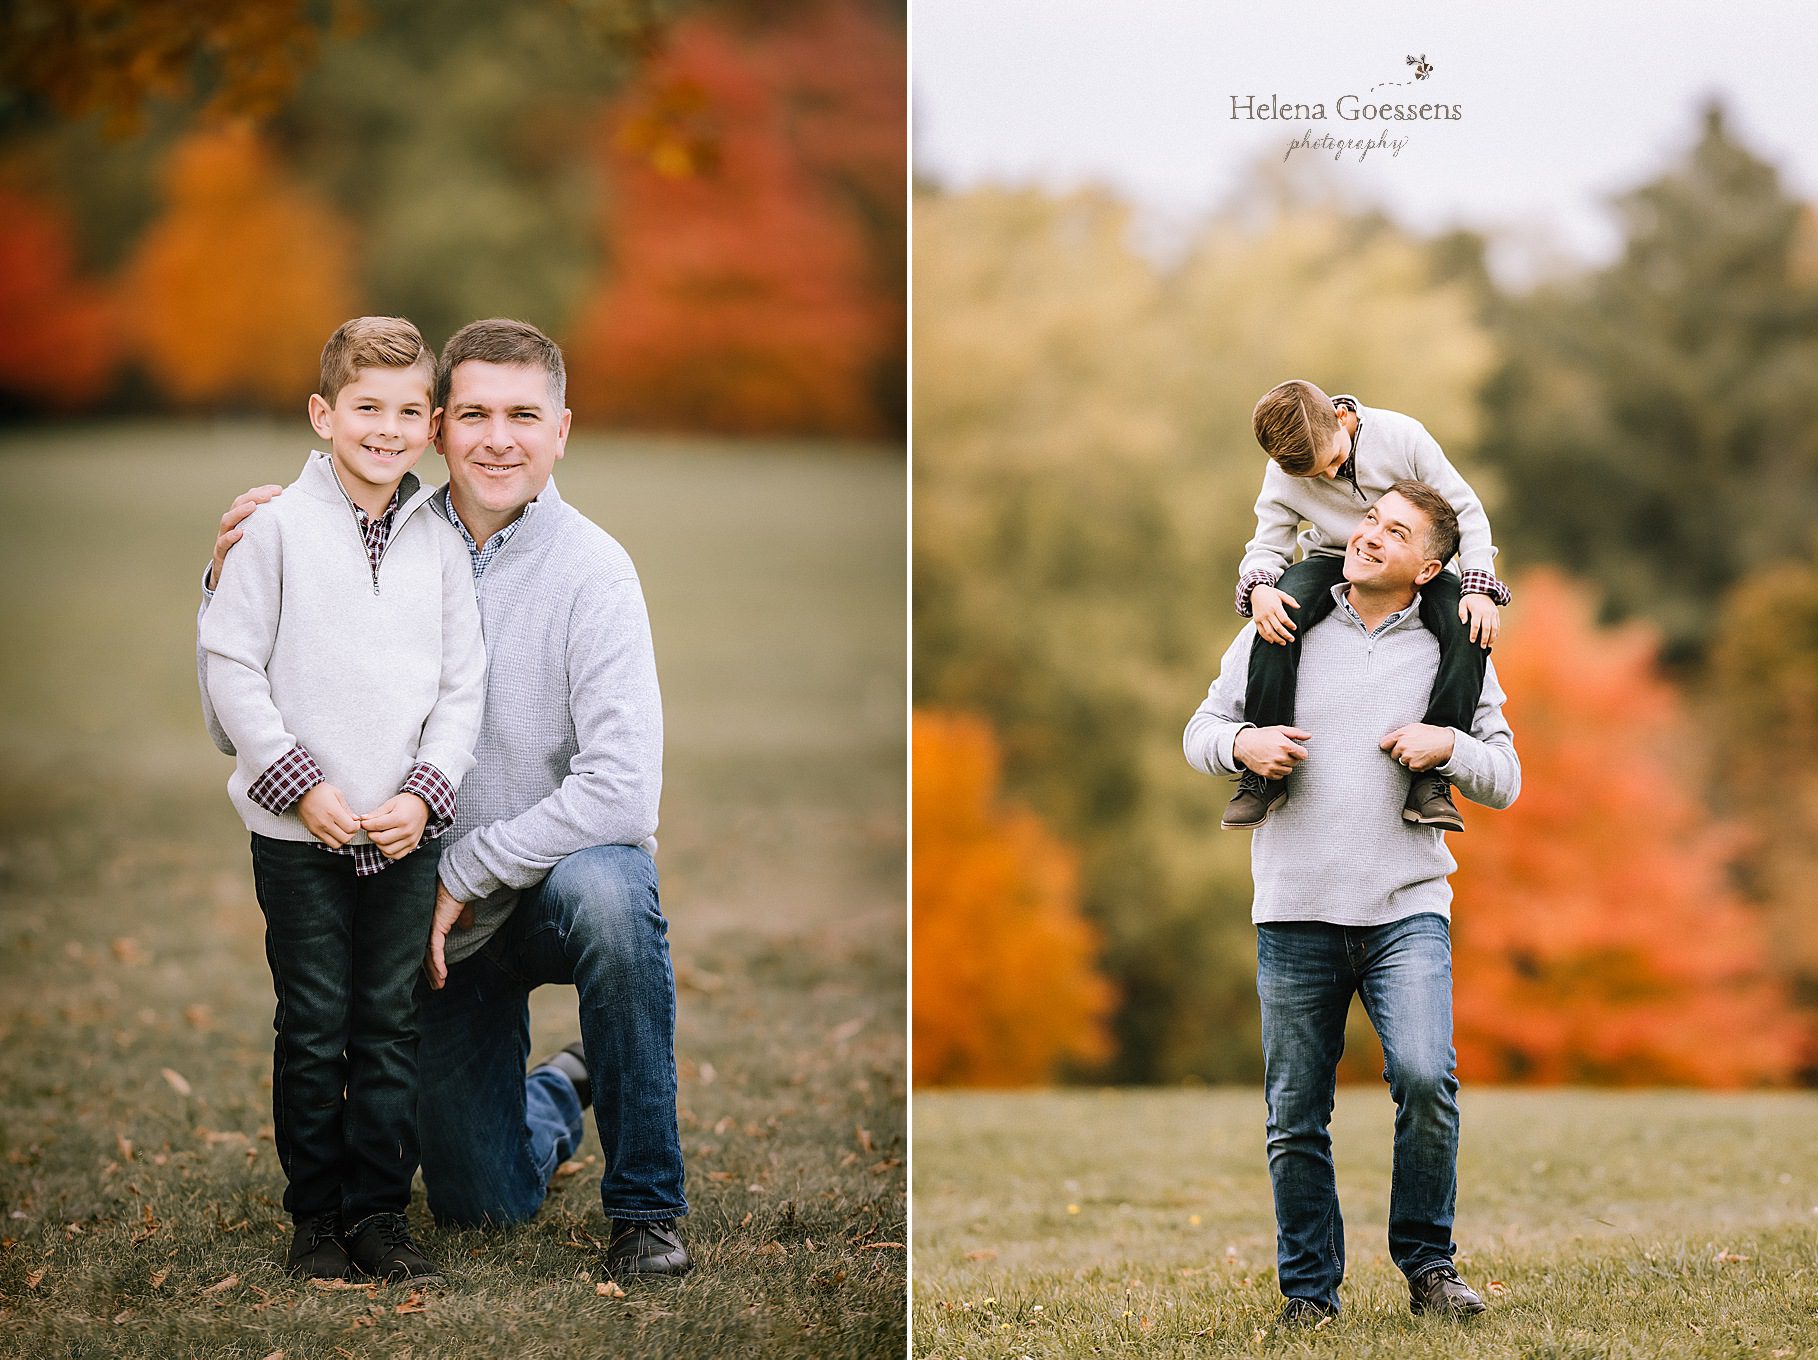 Helena Goessens Photography captures father and son during family photos in Brookline MA